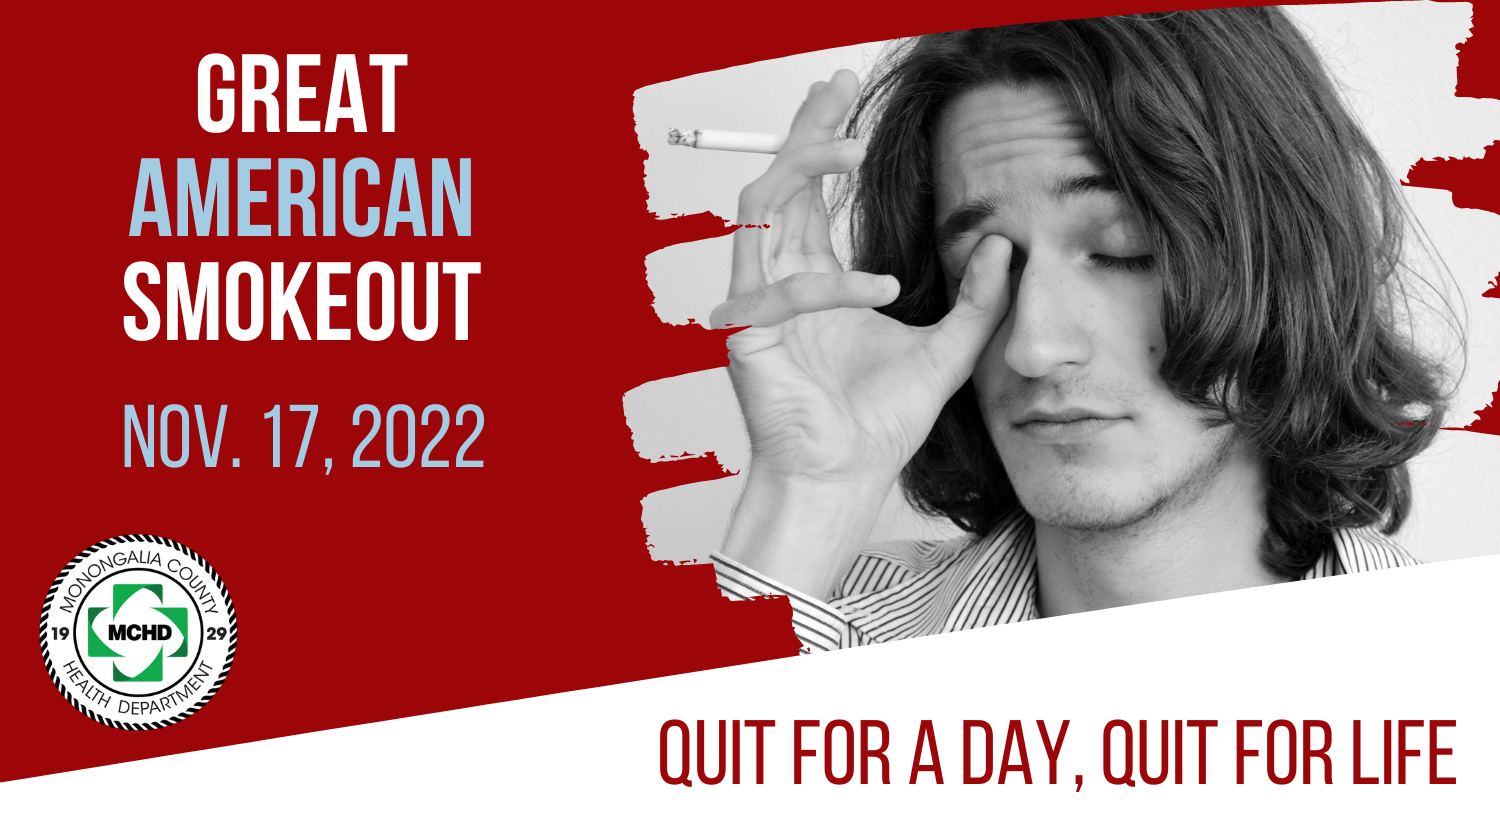 It's the Great American Smokeout!